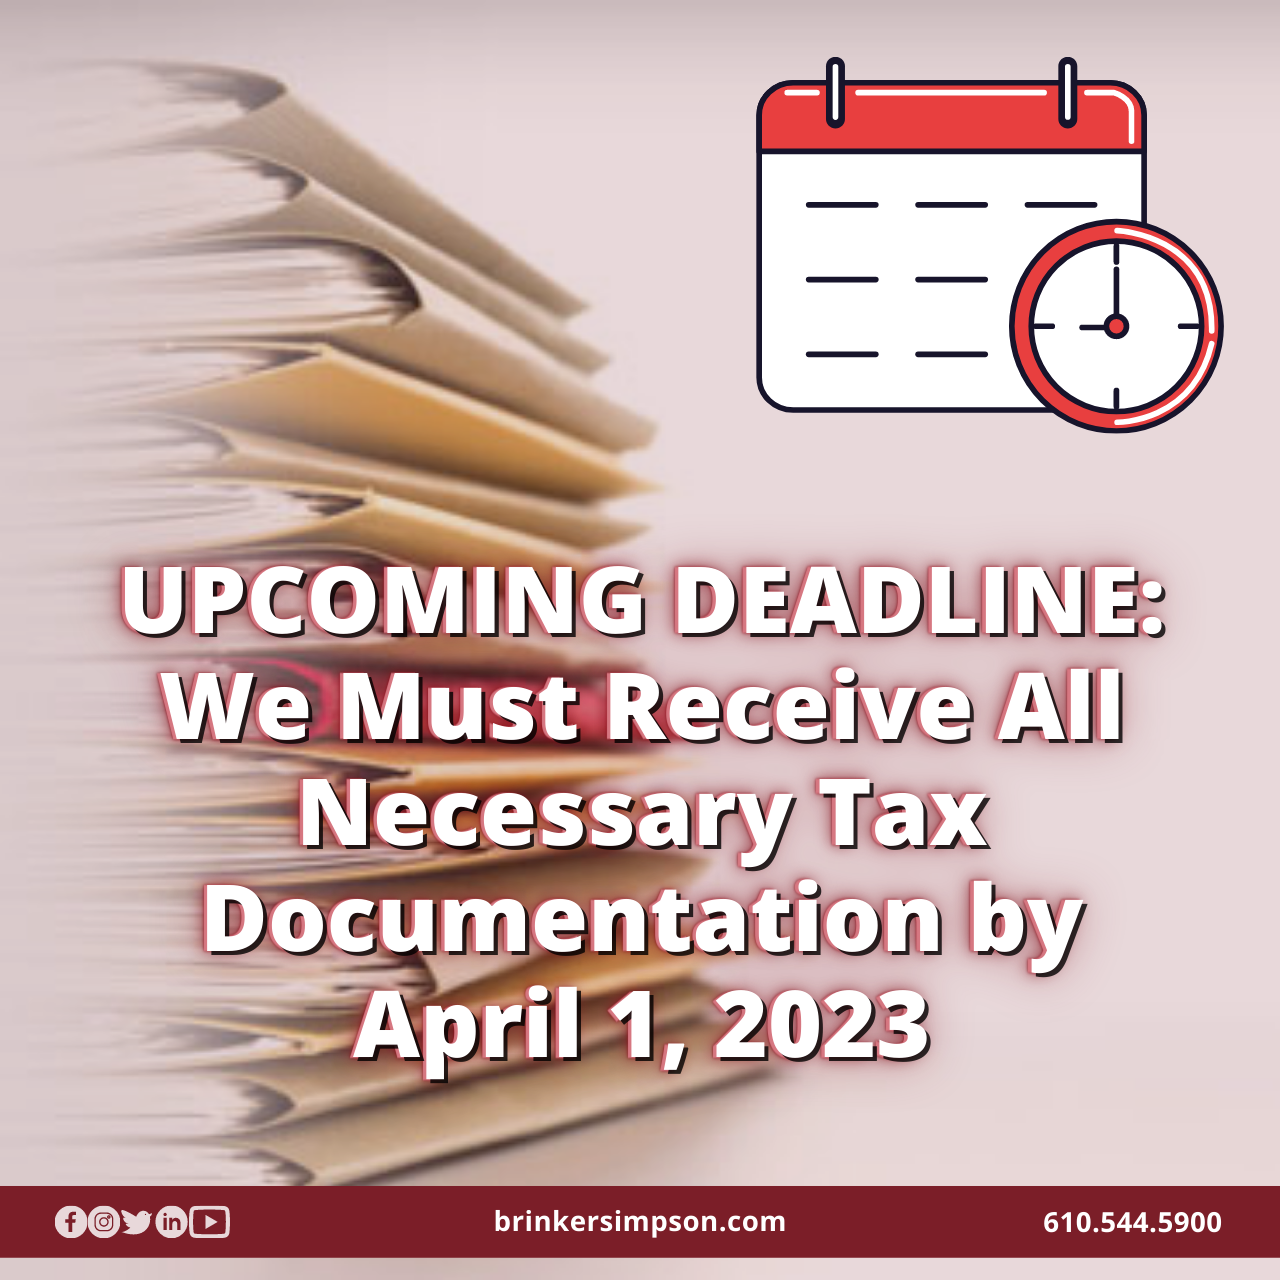 REMINDER: We Must Receive All Necessary Tax Documentation by April 1